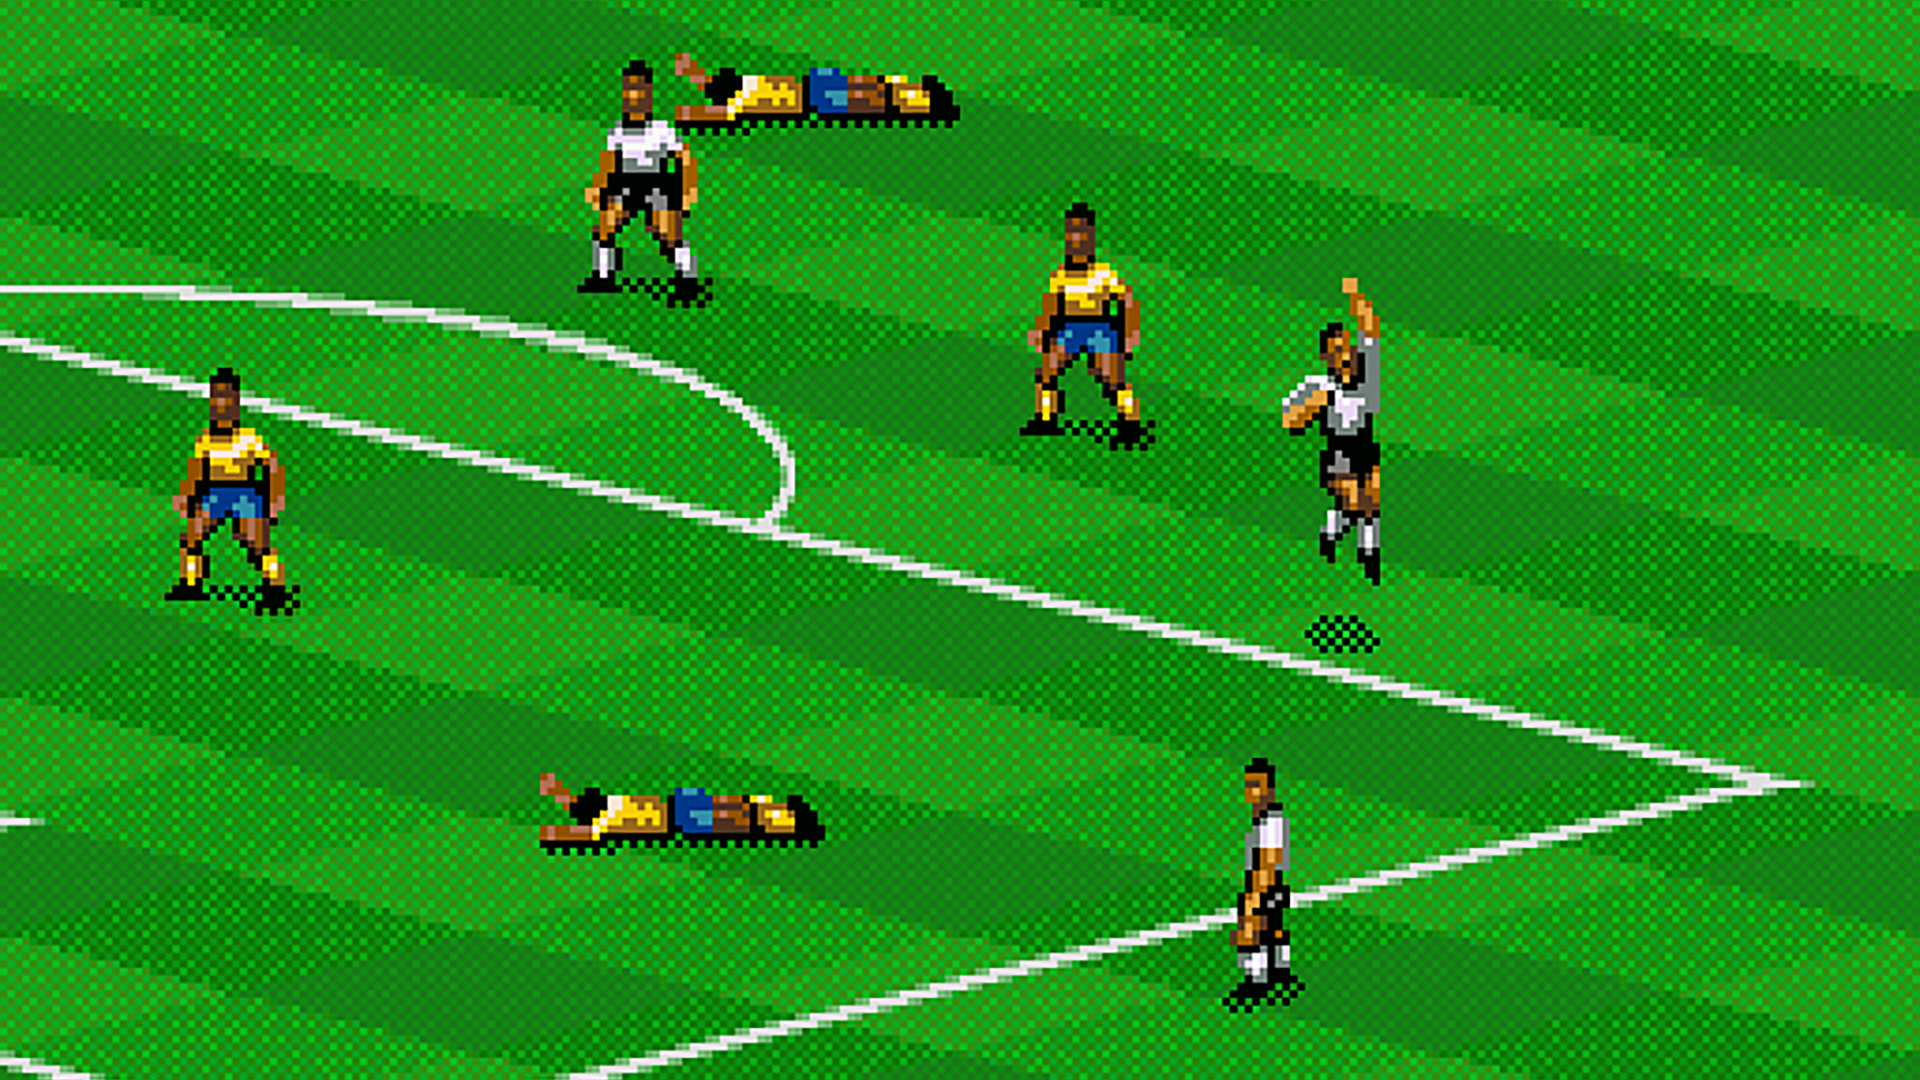 FIFA Soccer (Game): The football series starting in 1993, EA Sports. 1920x1080 Full HD Wallpaper.